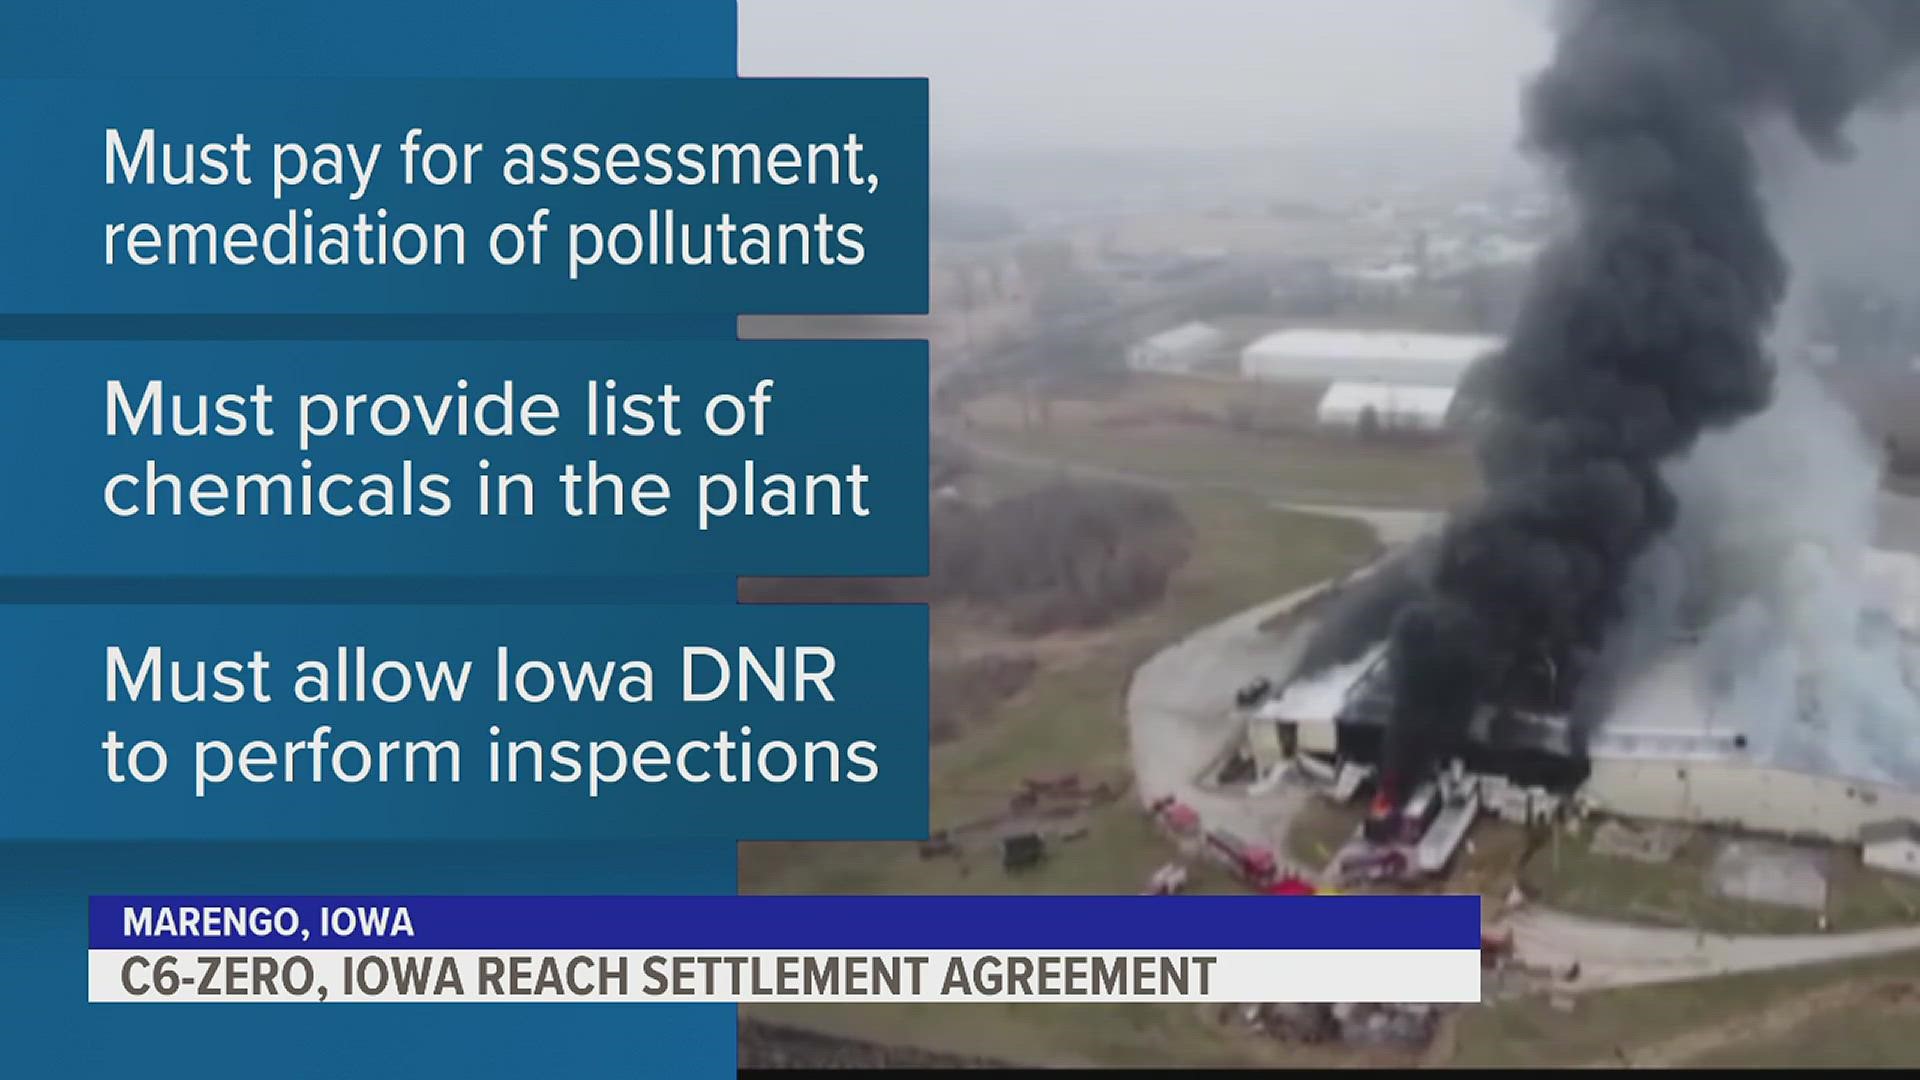 The consent order filed Monday requires C6-Zero to pay $333,580 to an environmental services agency that examined the plant's property after the explosion.